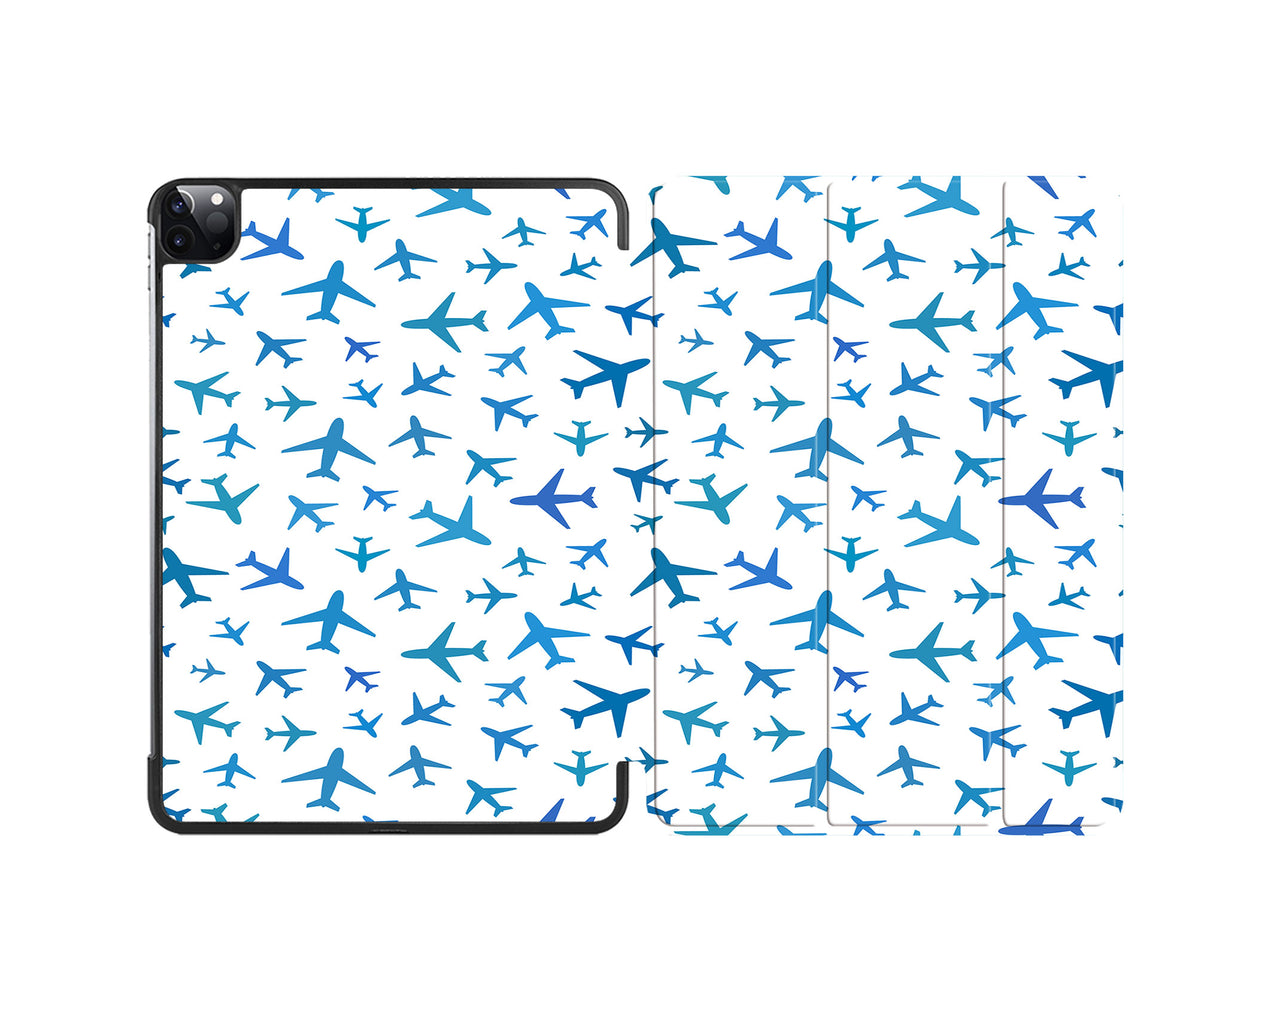 Many Airplanes Designed iPad Cases